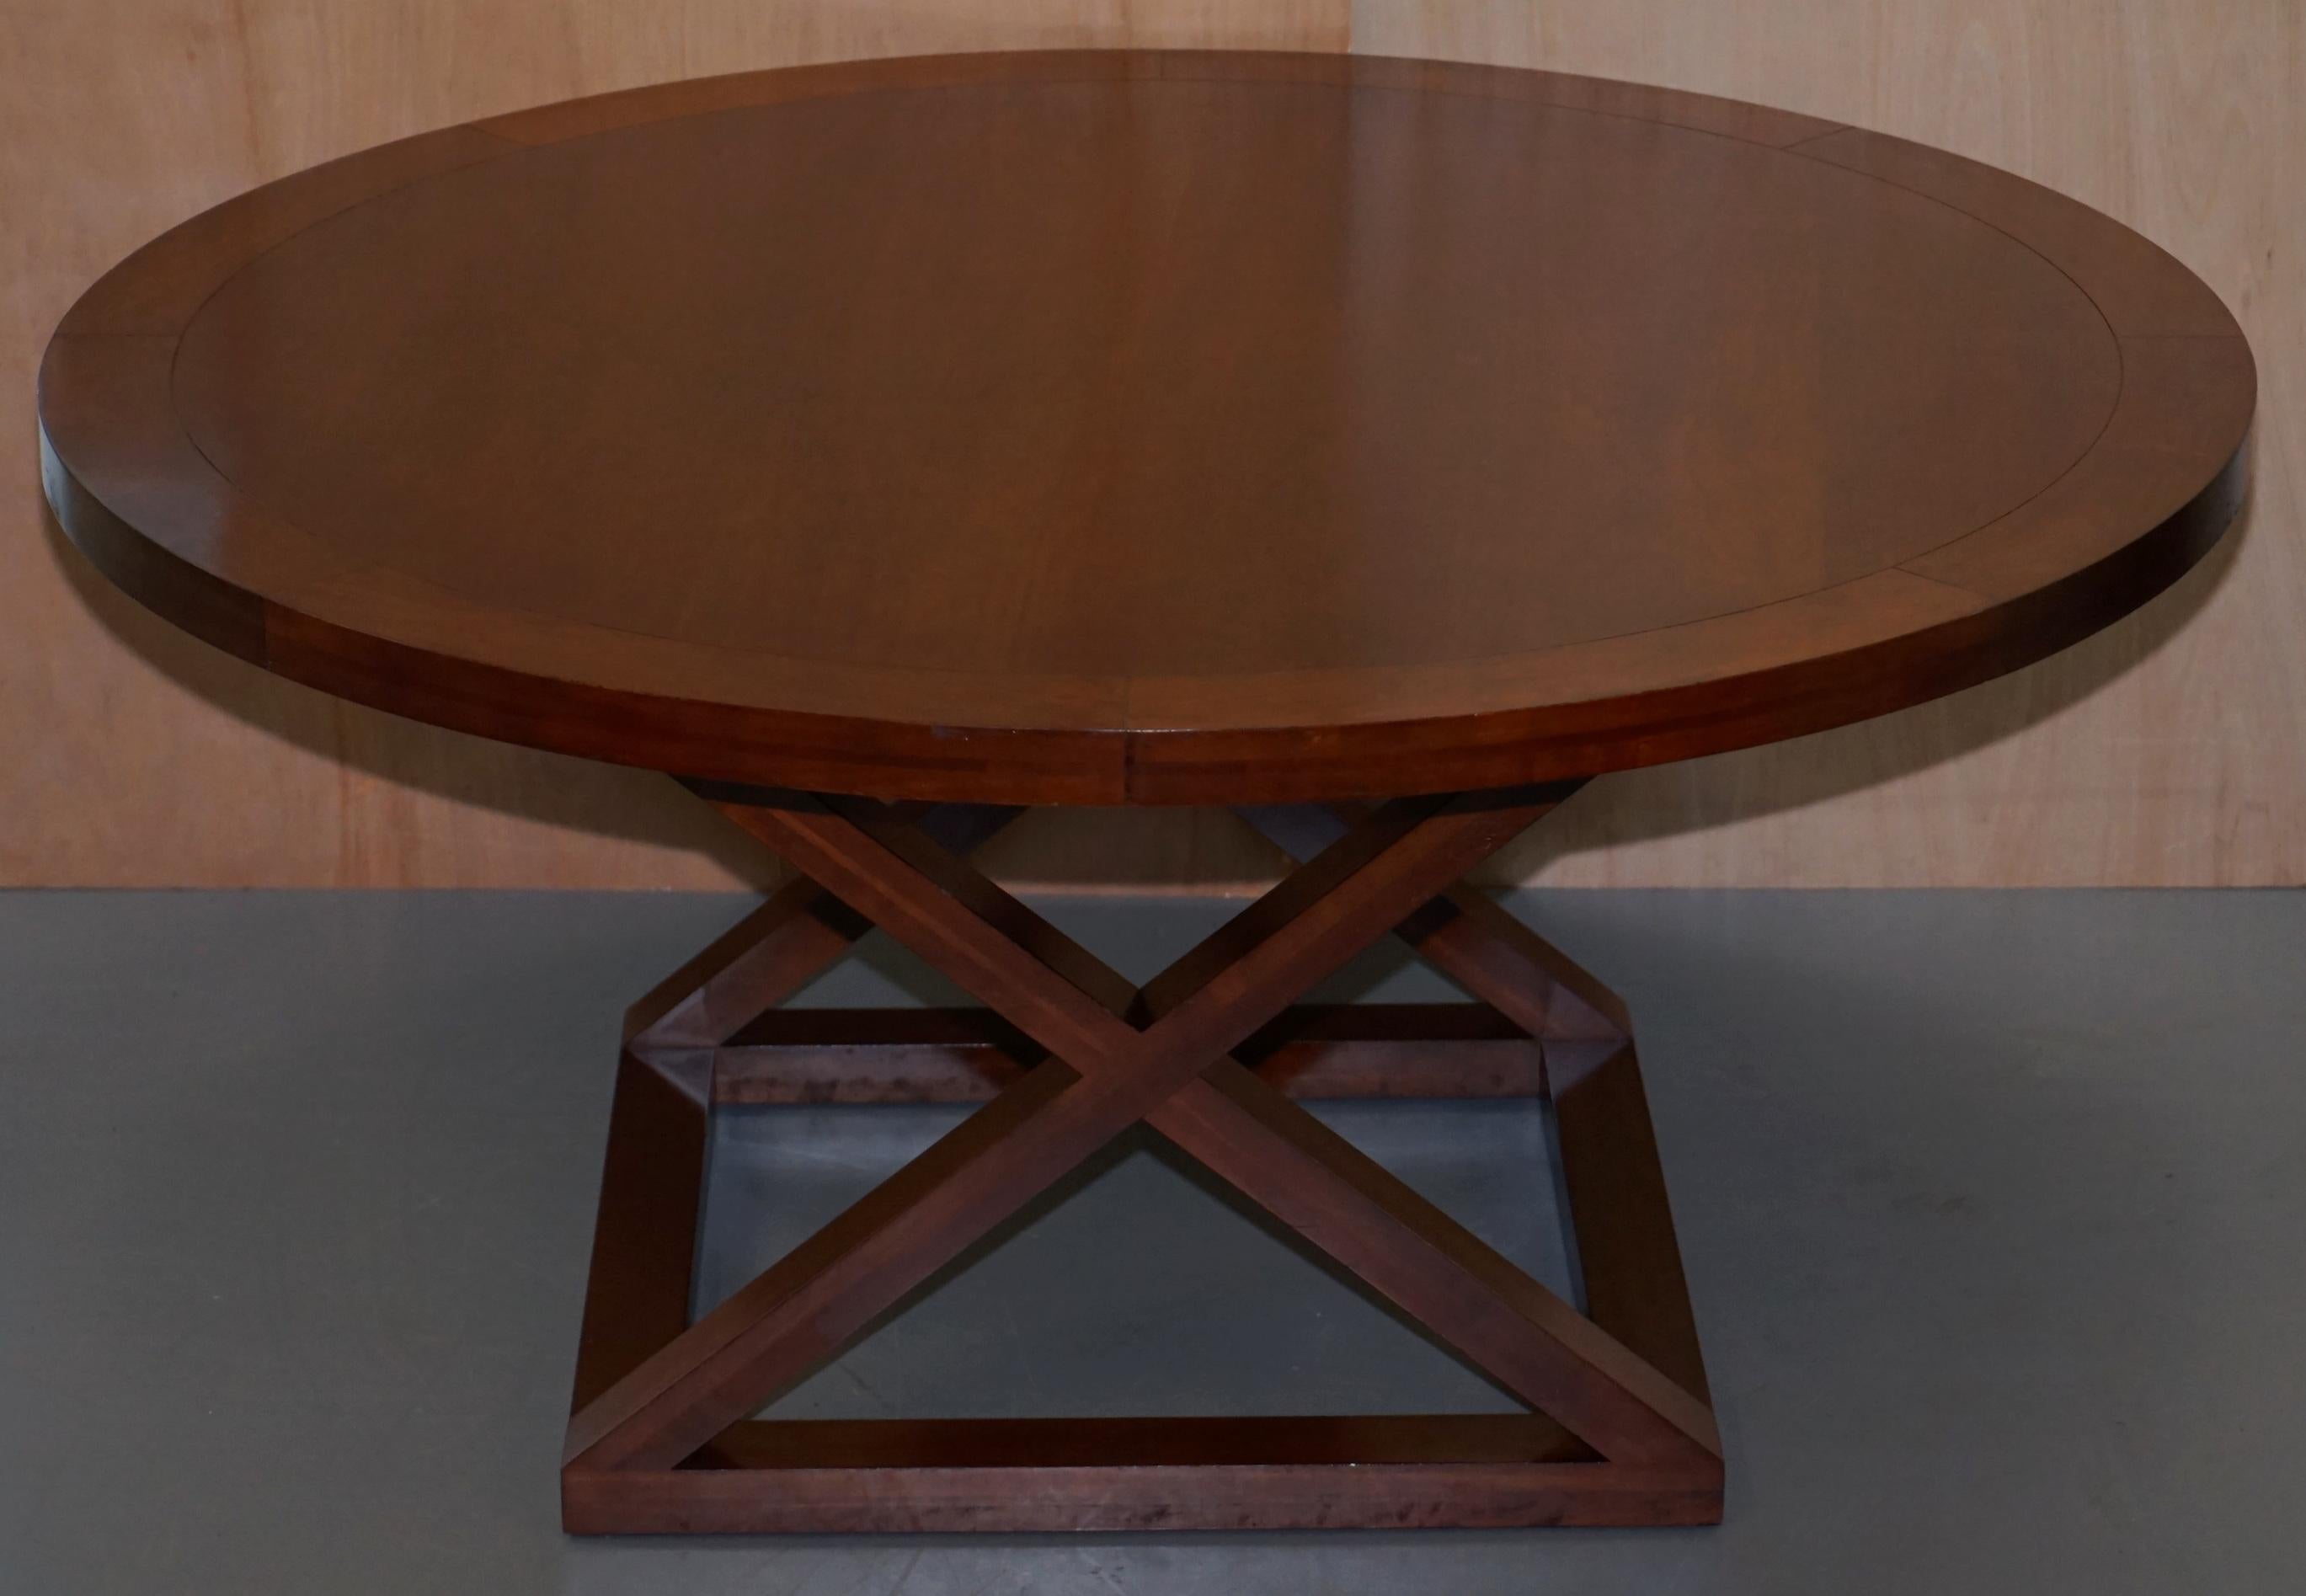 We are delighted to offer for sale this stunning Ralph Lauren solid cherrywood round Jamaica dining table to seat 4-8 people RRP £9800

A very good looking and well made table, its just about as solid and well made as they come, the base is a very